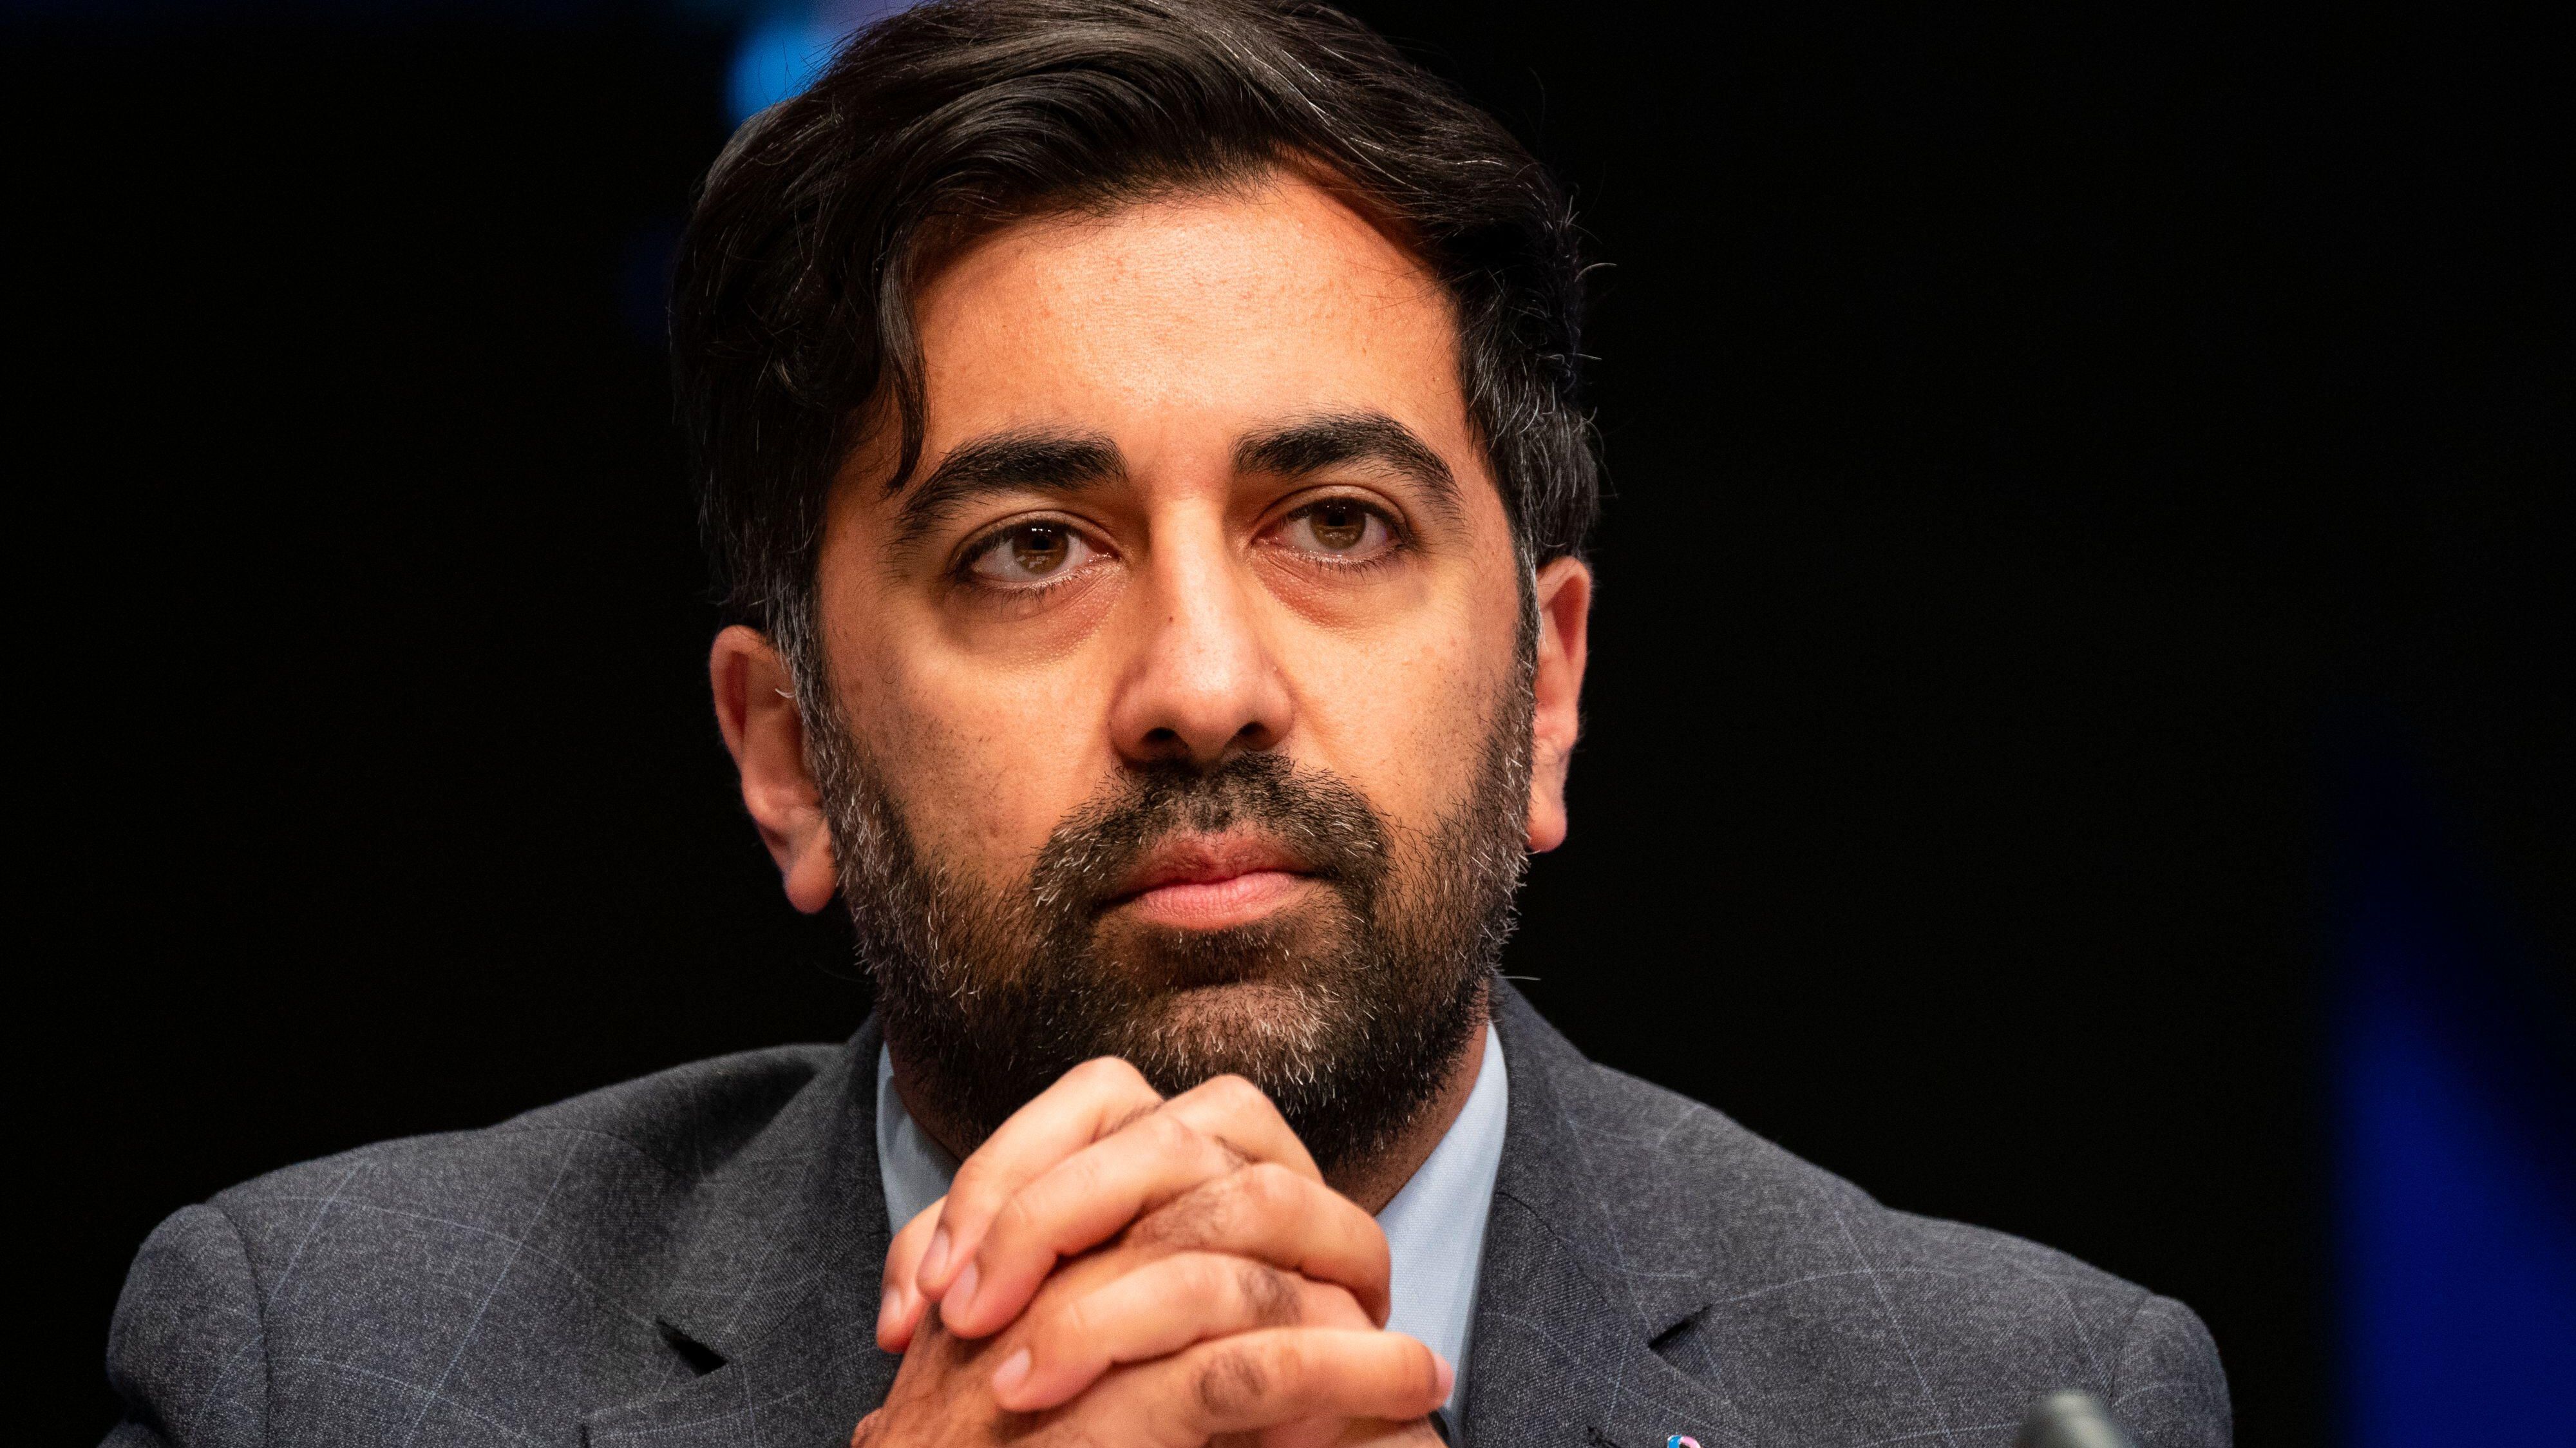 Humza Yousaf announced as new leader of SNP